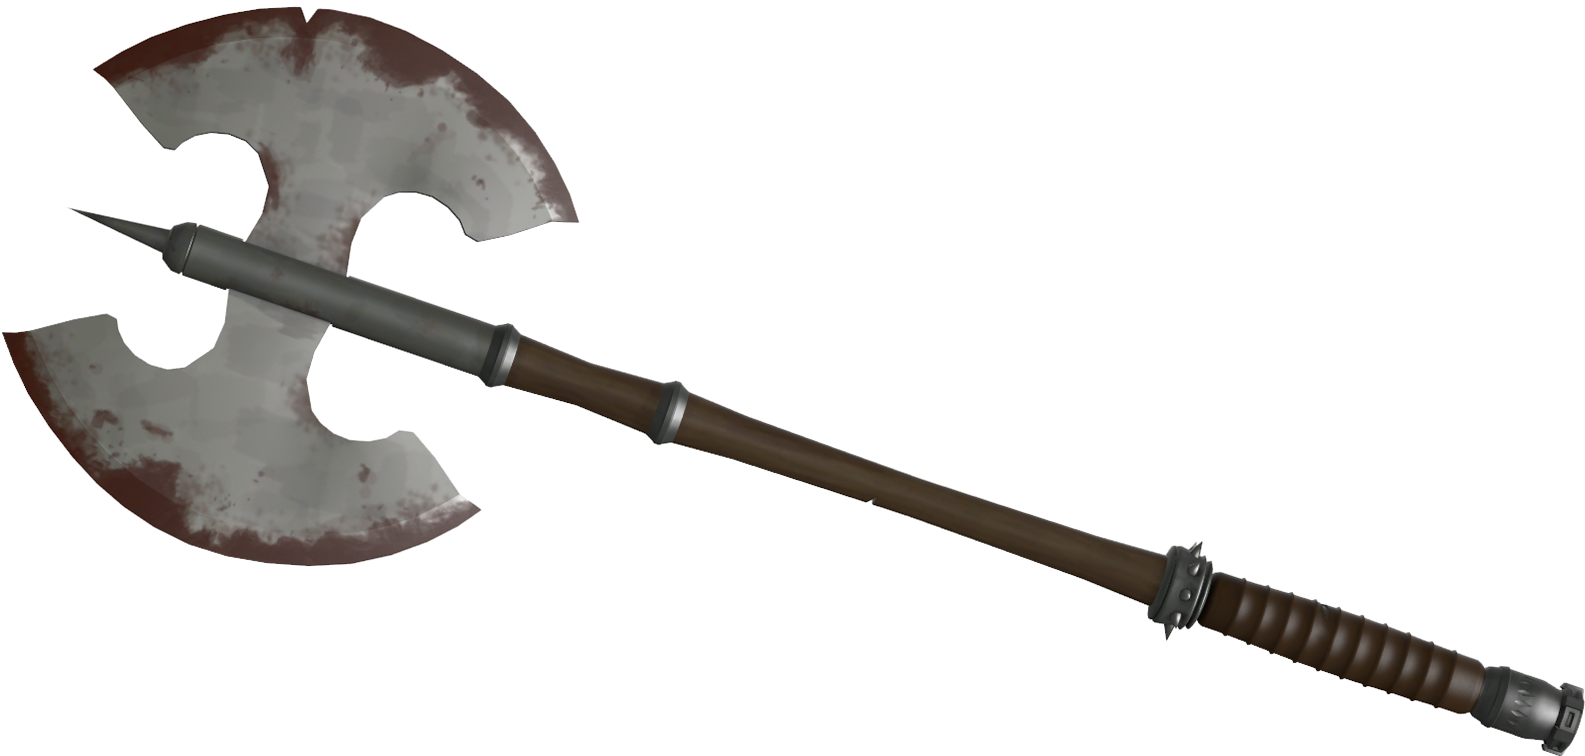 Weapon PNG Transparent Image, Weapon PNG - Free PNG